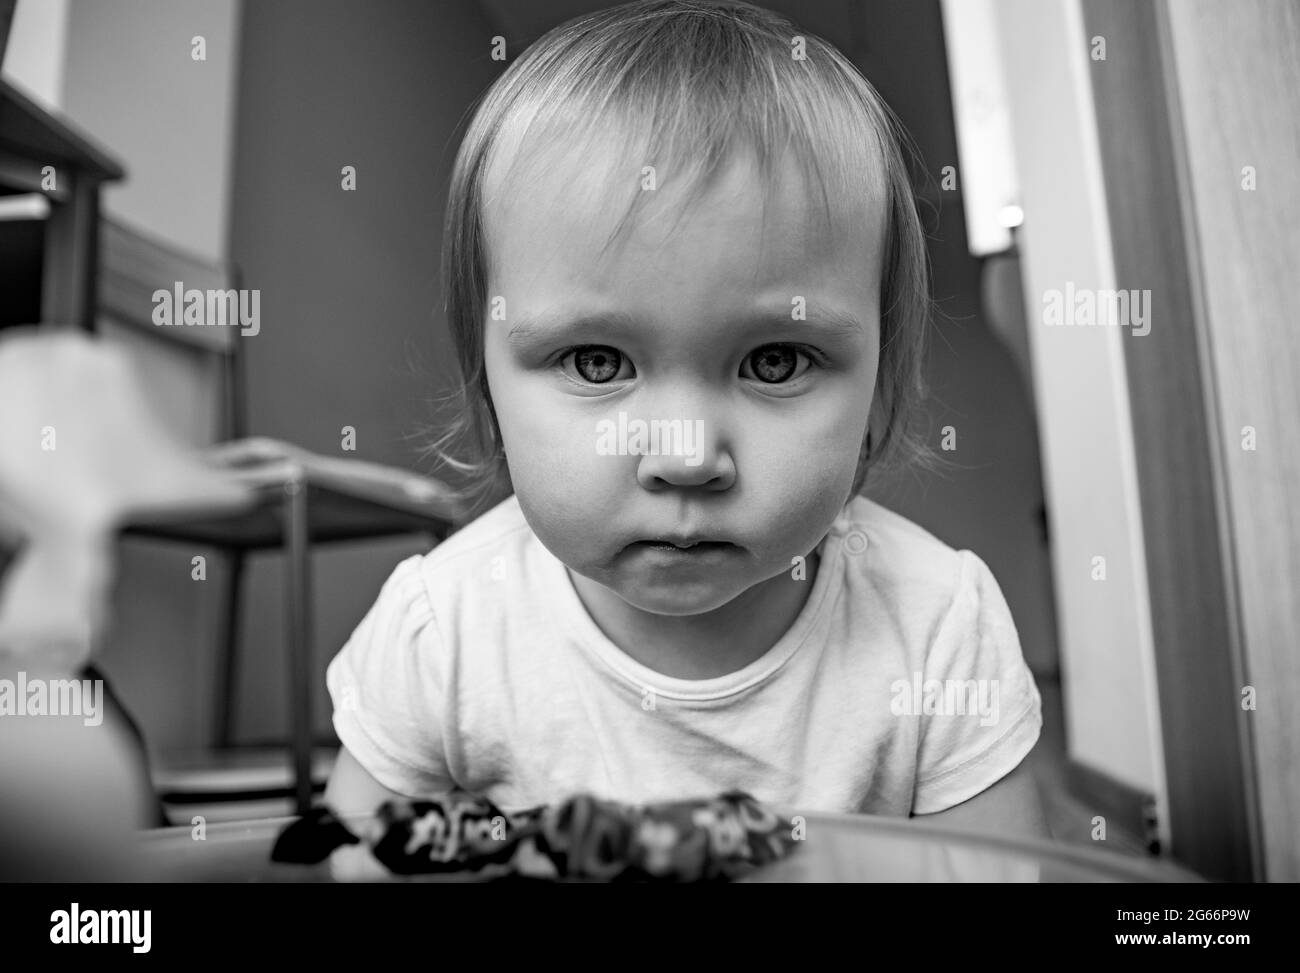 A beautiful little caucasian girl seriously looks into the frame with big eyes. Portrait of a child in black and white. Stock Photo